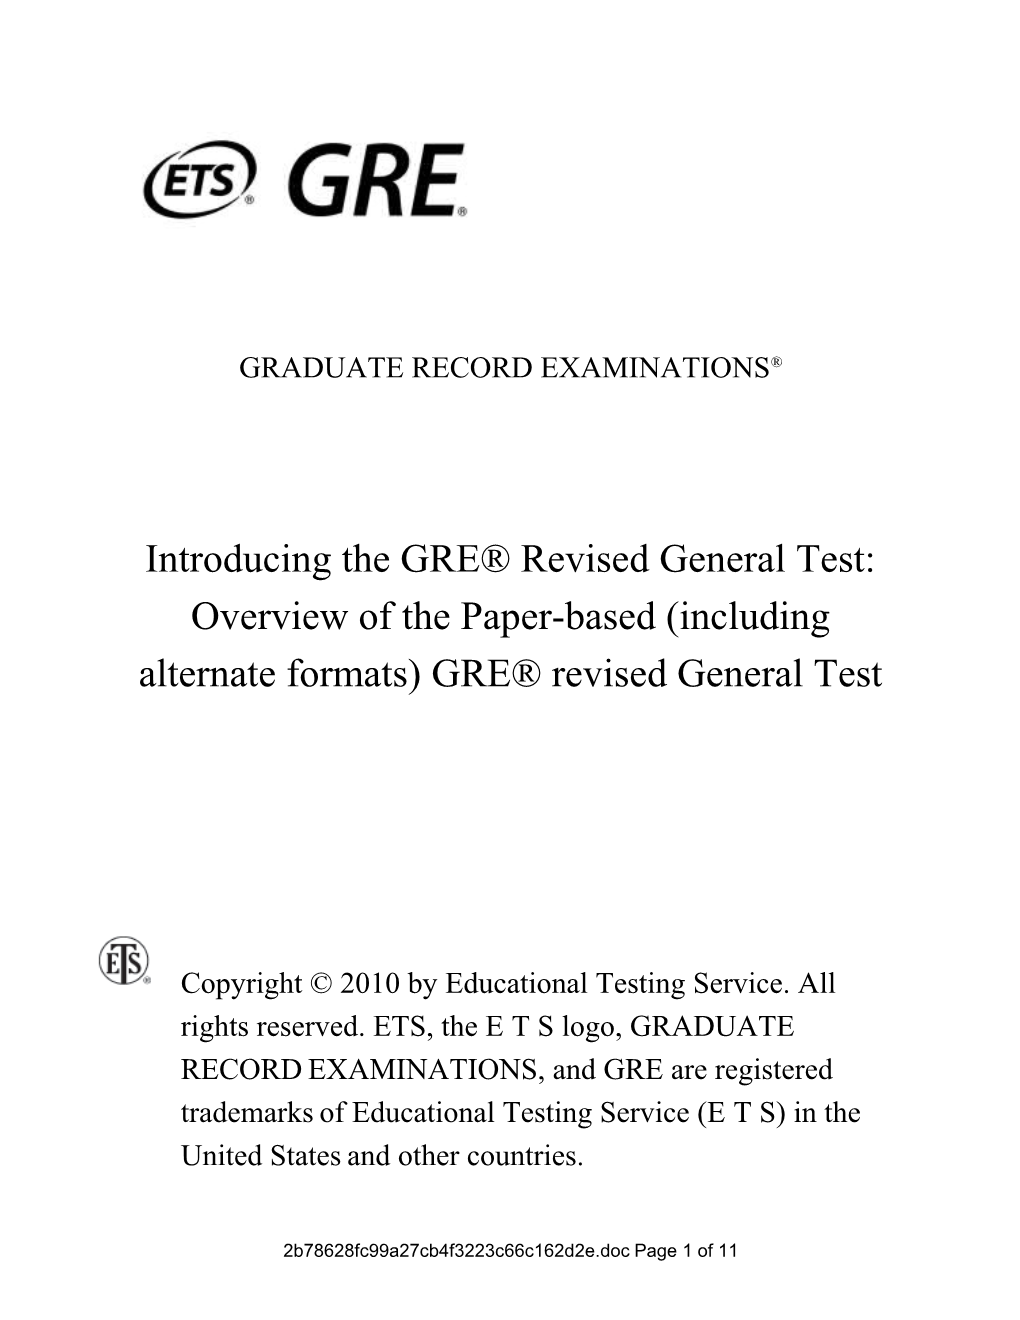 Introducing the GRE Revised General Test